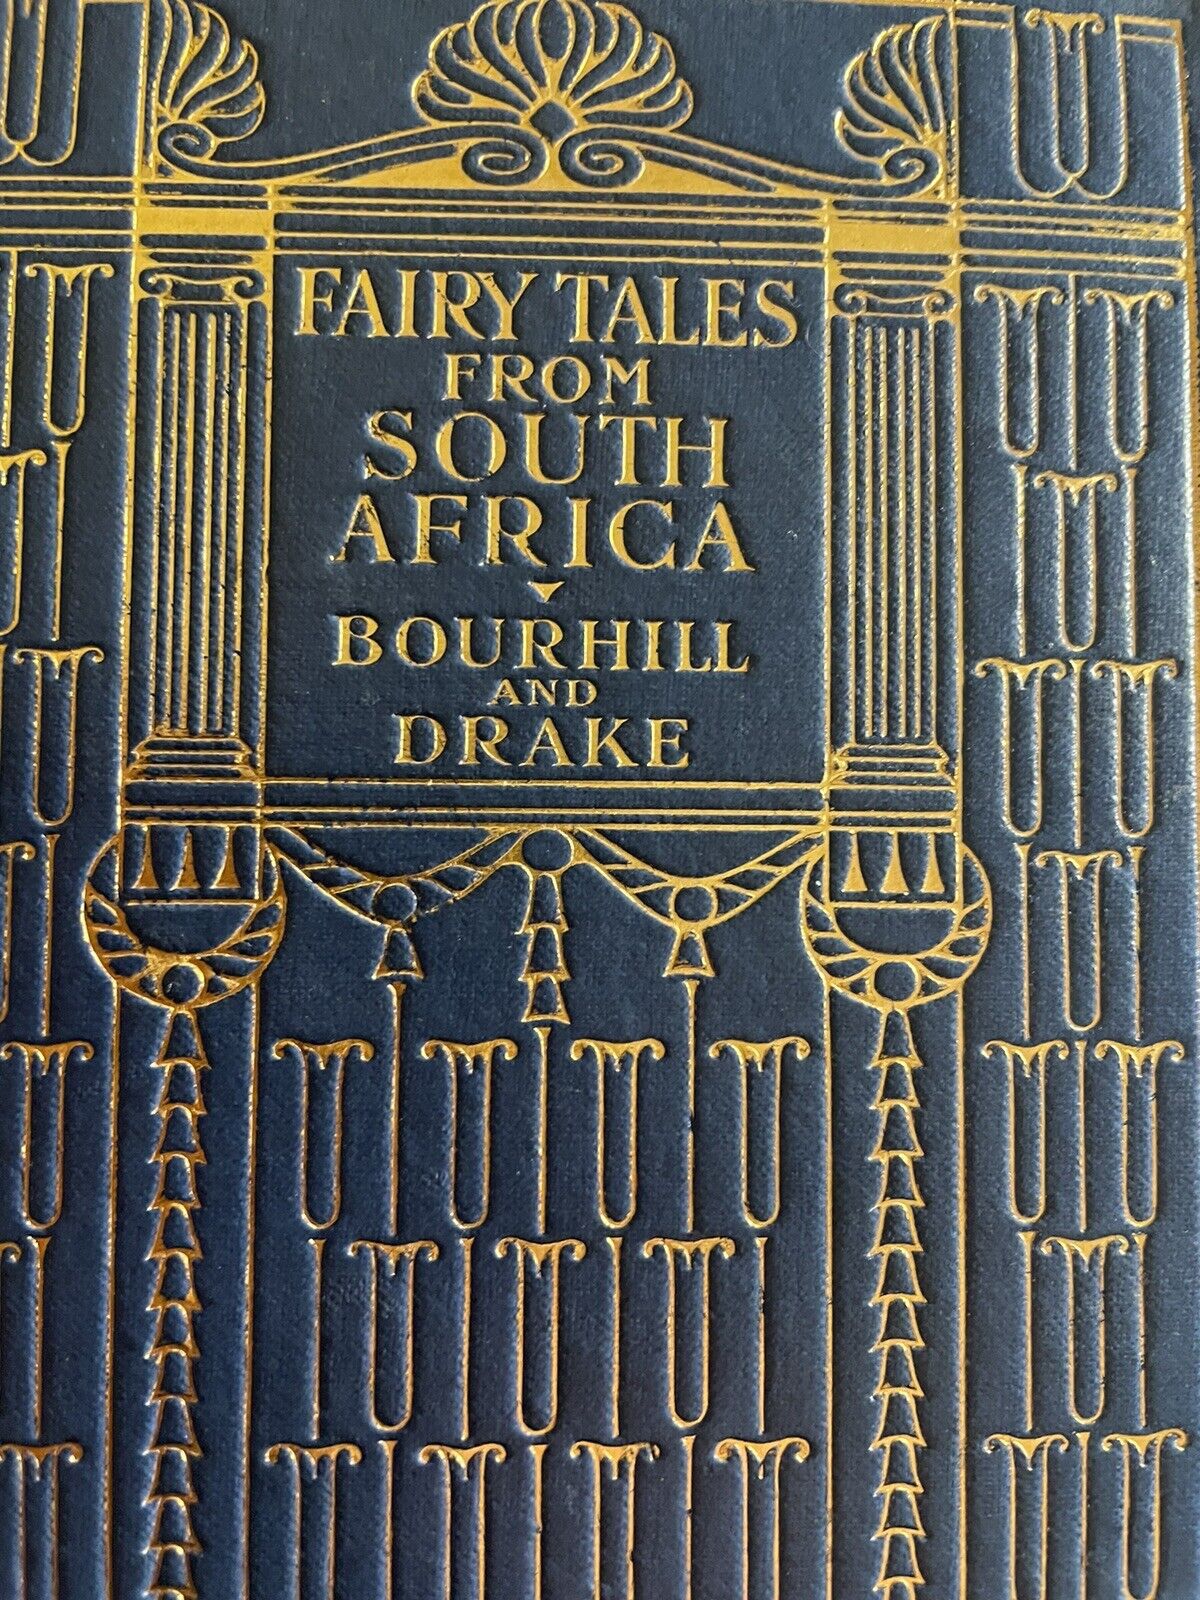 1910 Fairy Tales from South Africa : Illustrated : Decorative Cloth Binding VGC